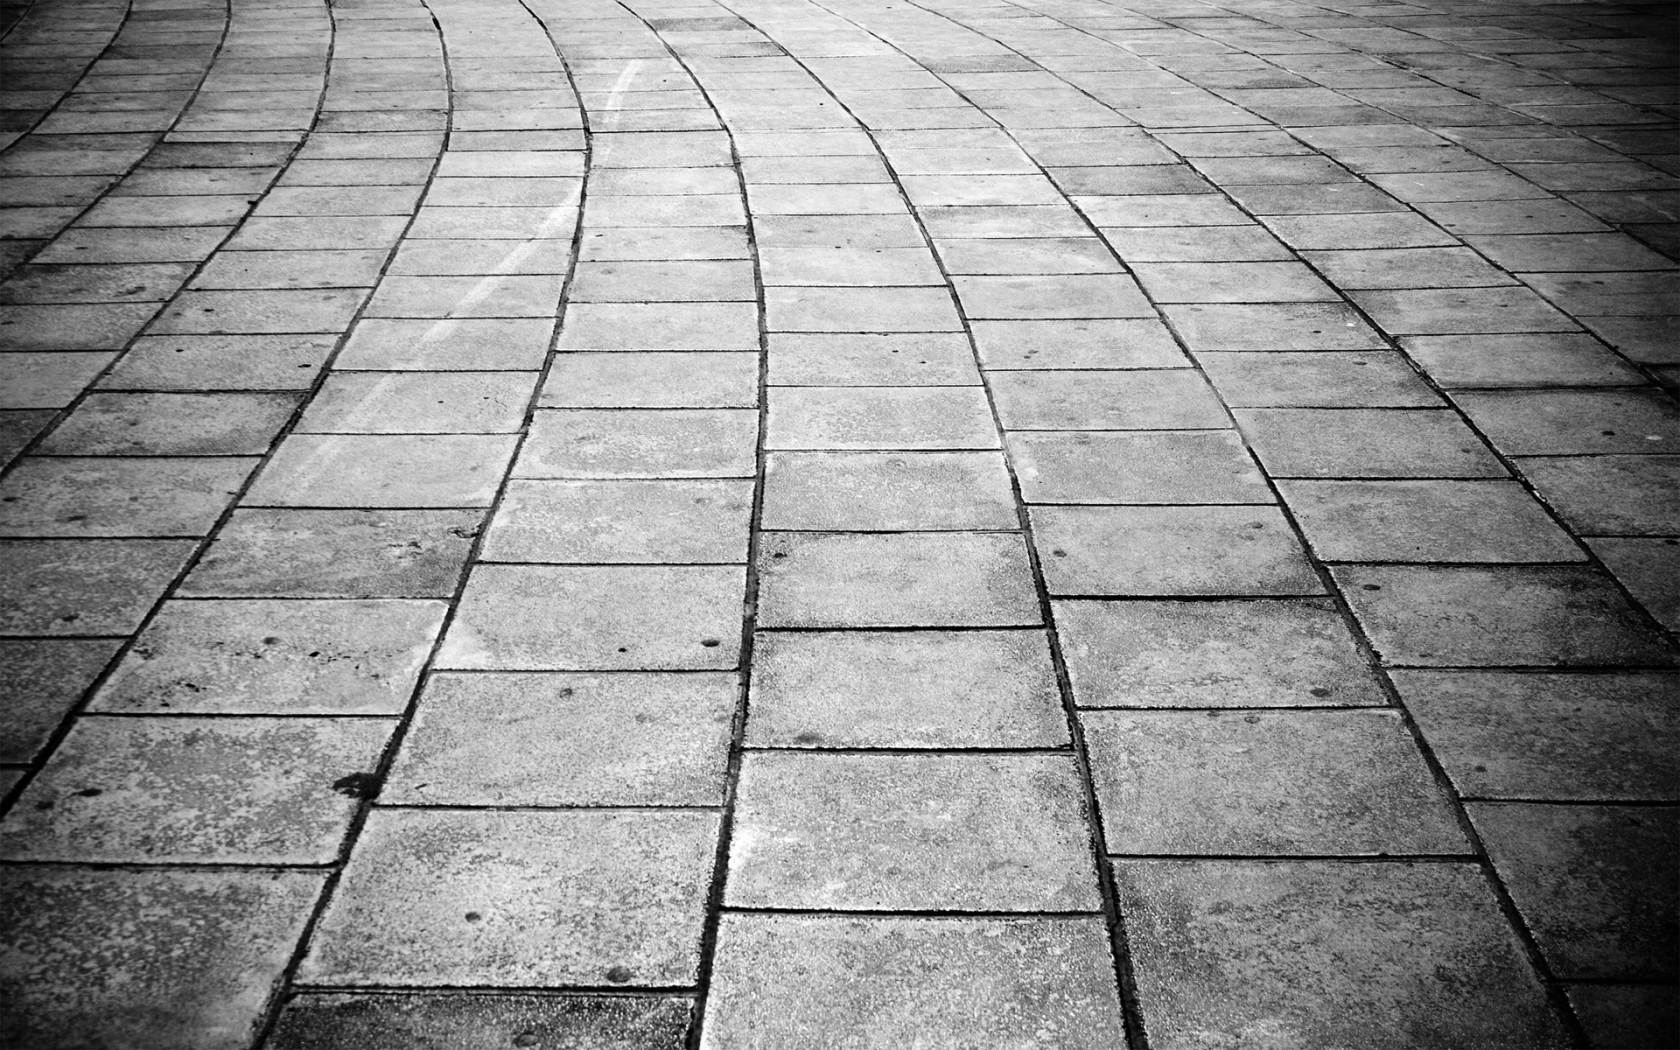 Cobbles on the walking paths, background